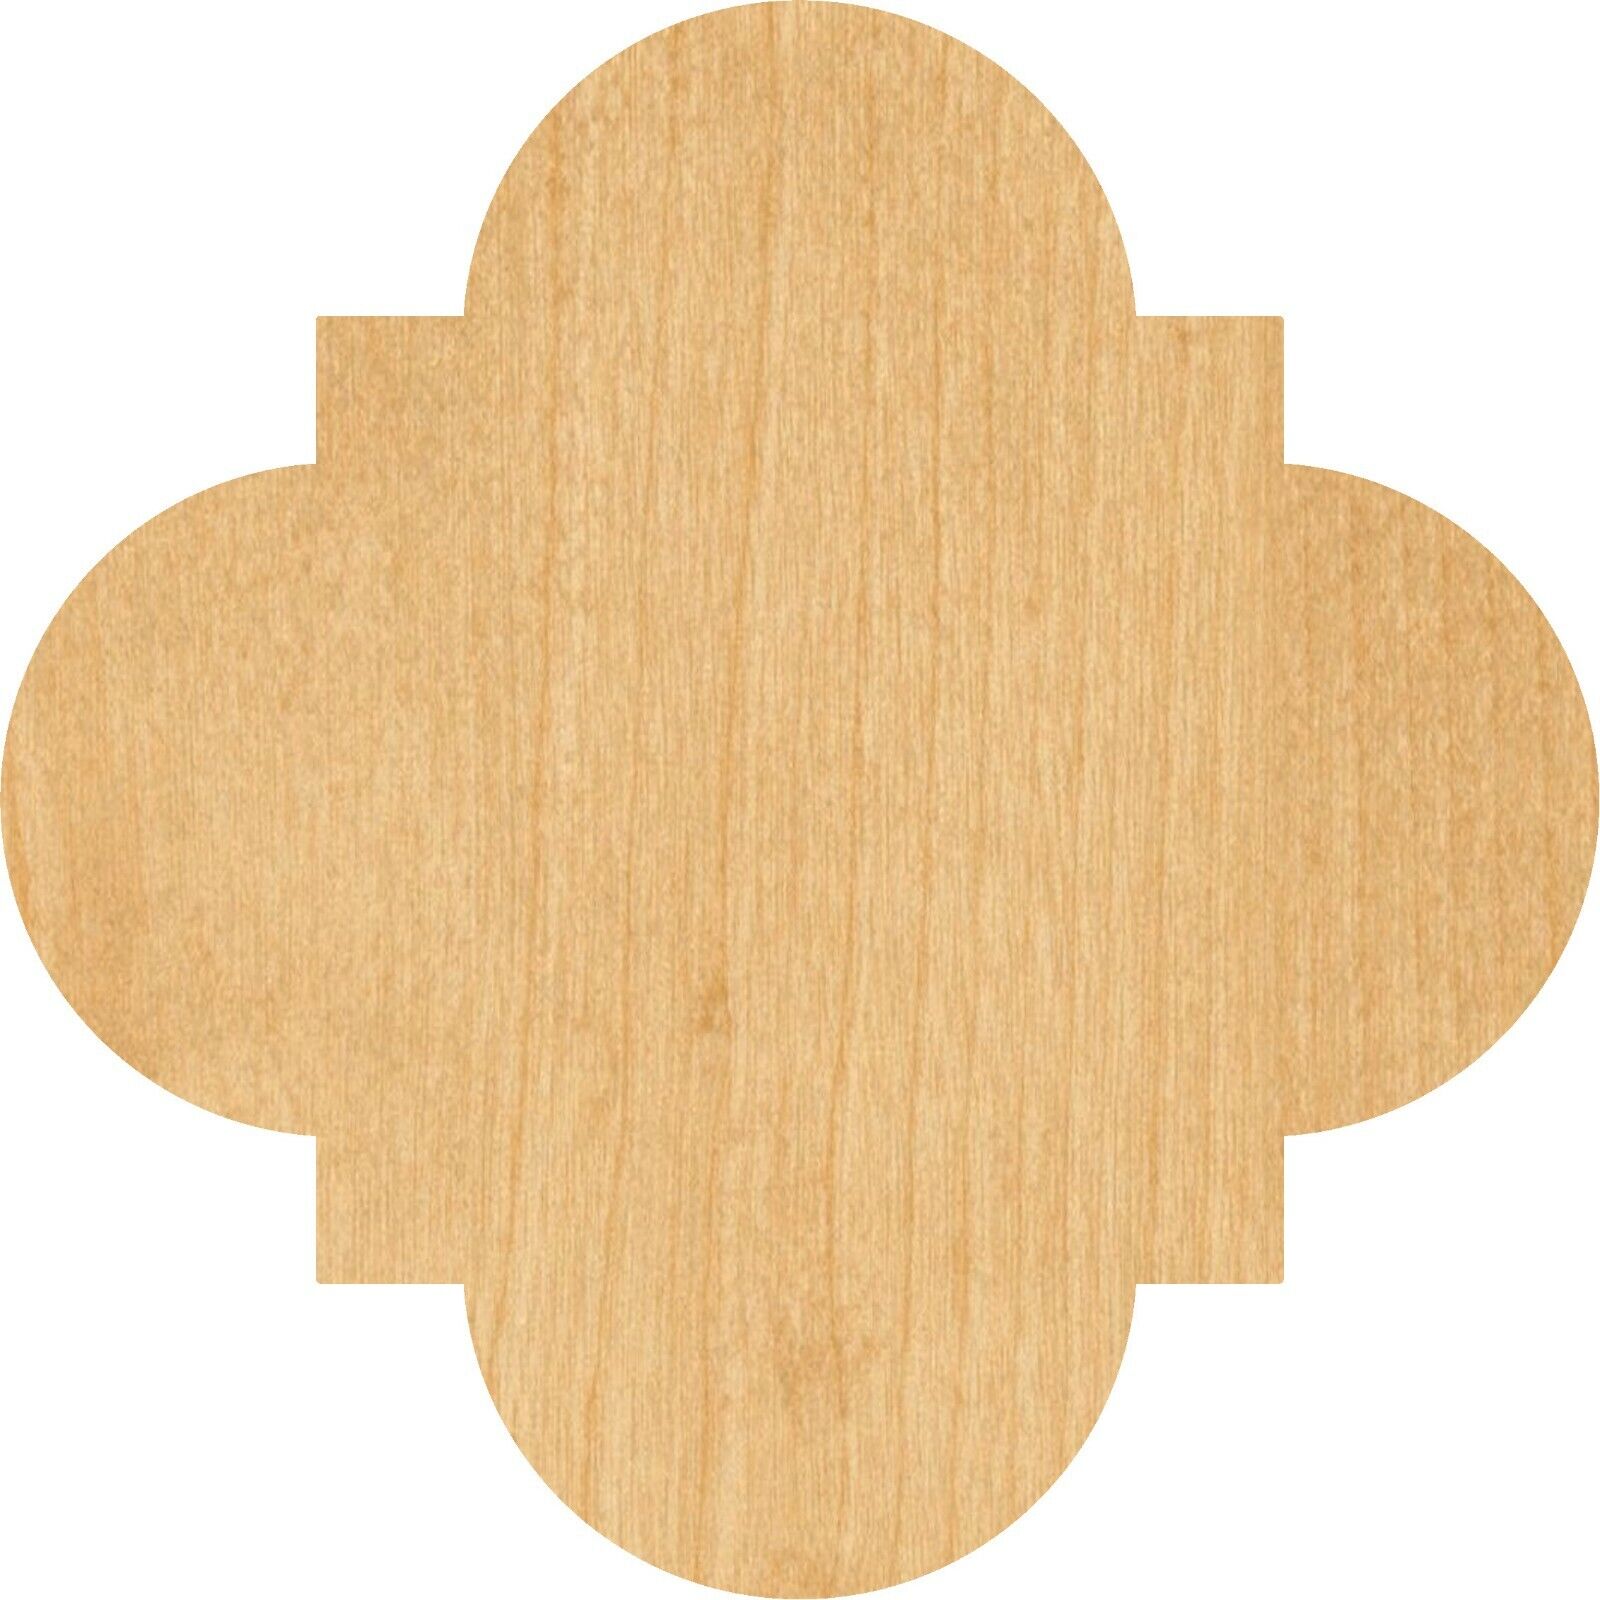 Clearance SALE Limited NEW before selling time Quatrefoil Laser Cut Out Wood Supply Craft Shape - Woodcraft